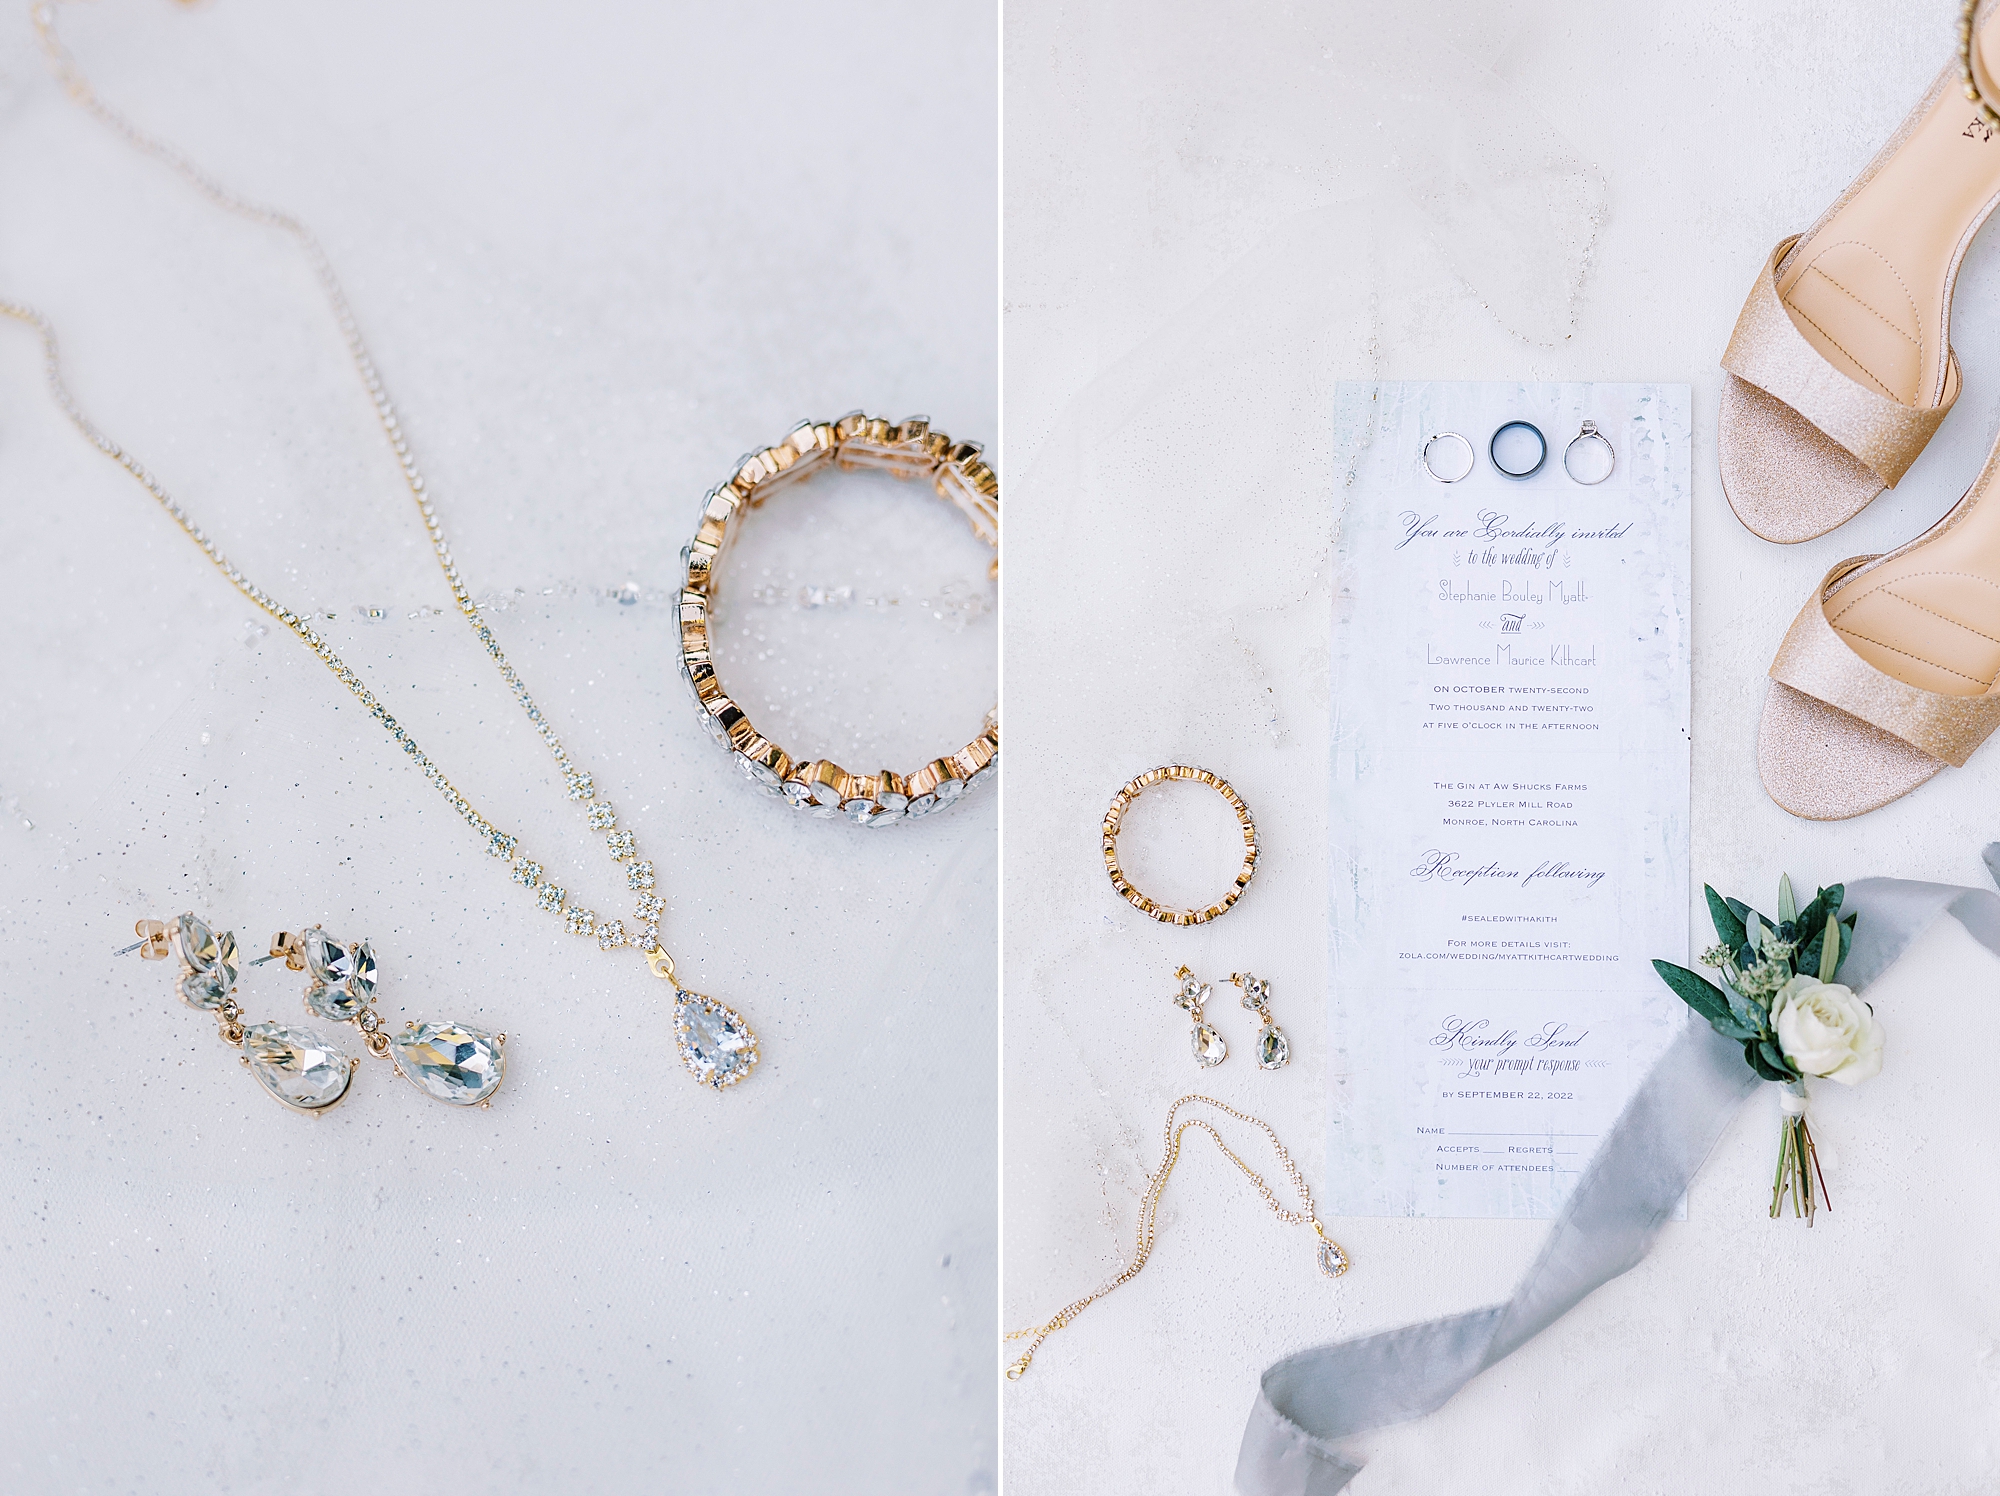 bride's jewelry and stationery for rustic Gin at Aw Shucks Farm wedding day